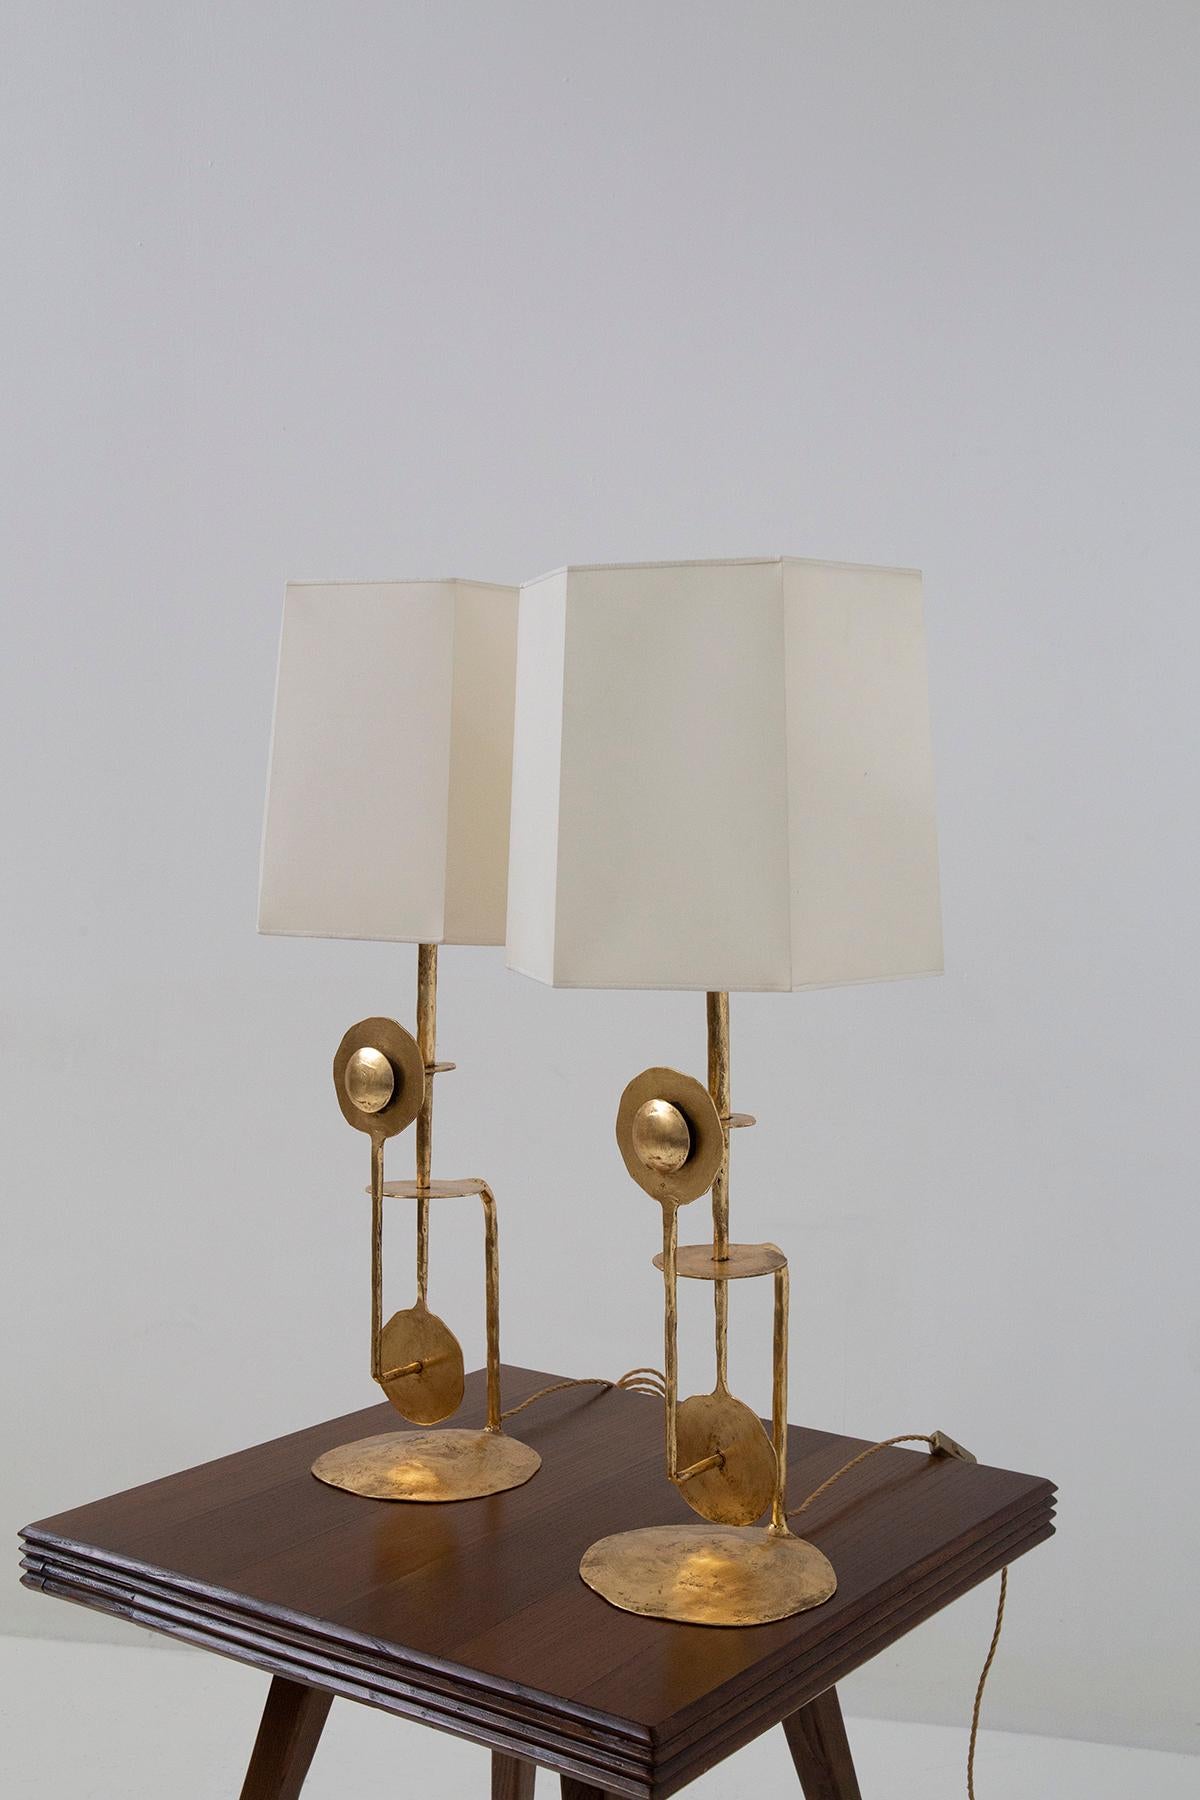 Allow me to introduce you to an exquisite pair of Italian brutalist table lamps from the 1980s. Crafted with intricate detail in gleaming golden metal, these lamps are a stunning testament to Italian craftsmanship, an embodiment of artistry.

The